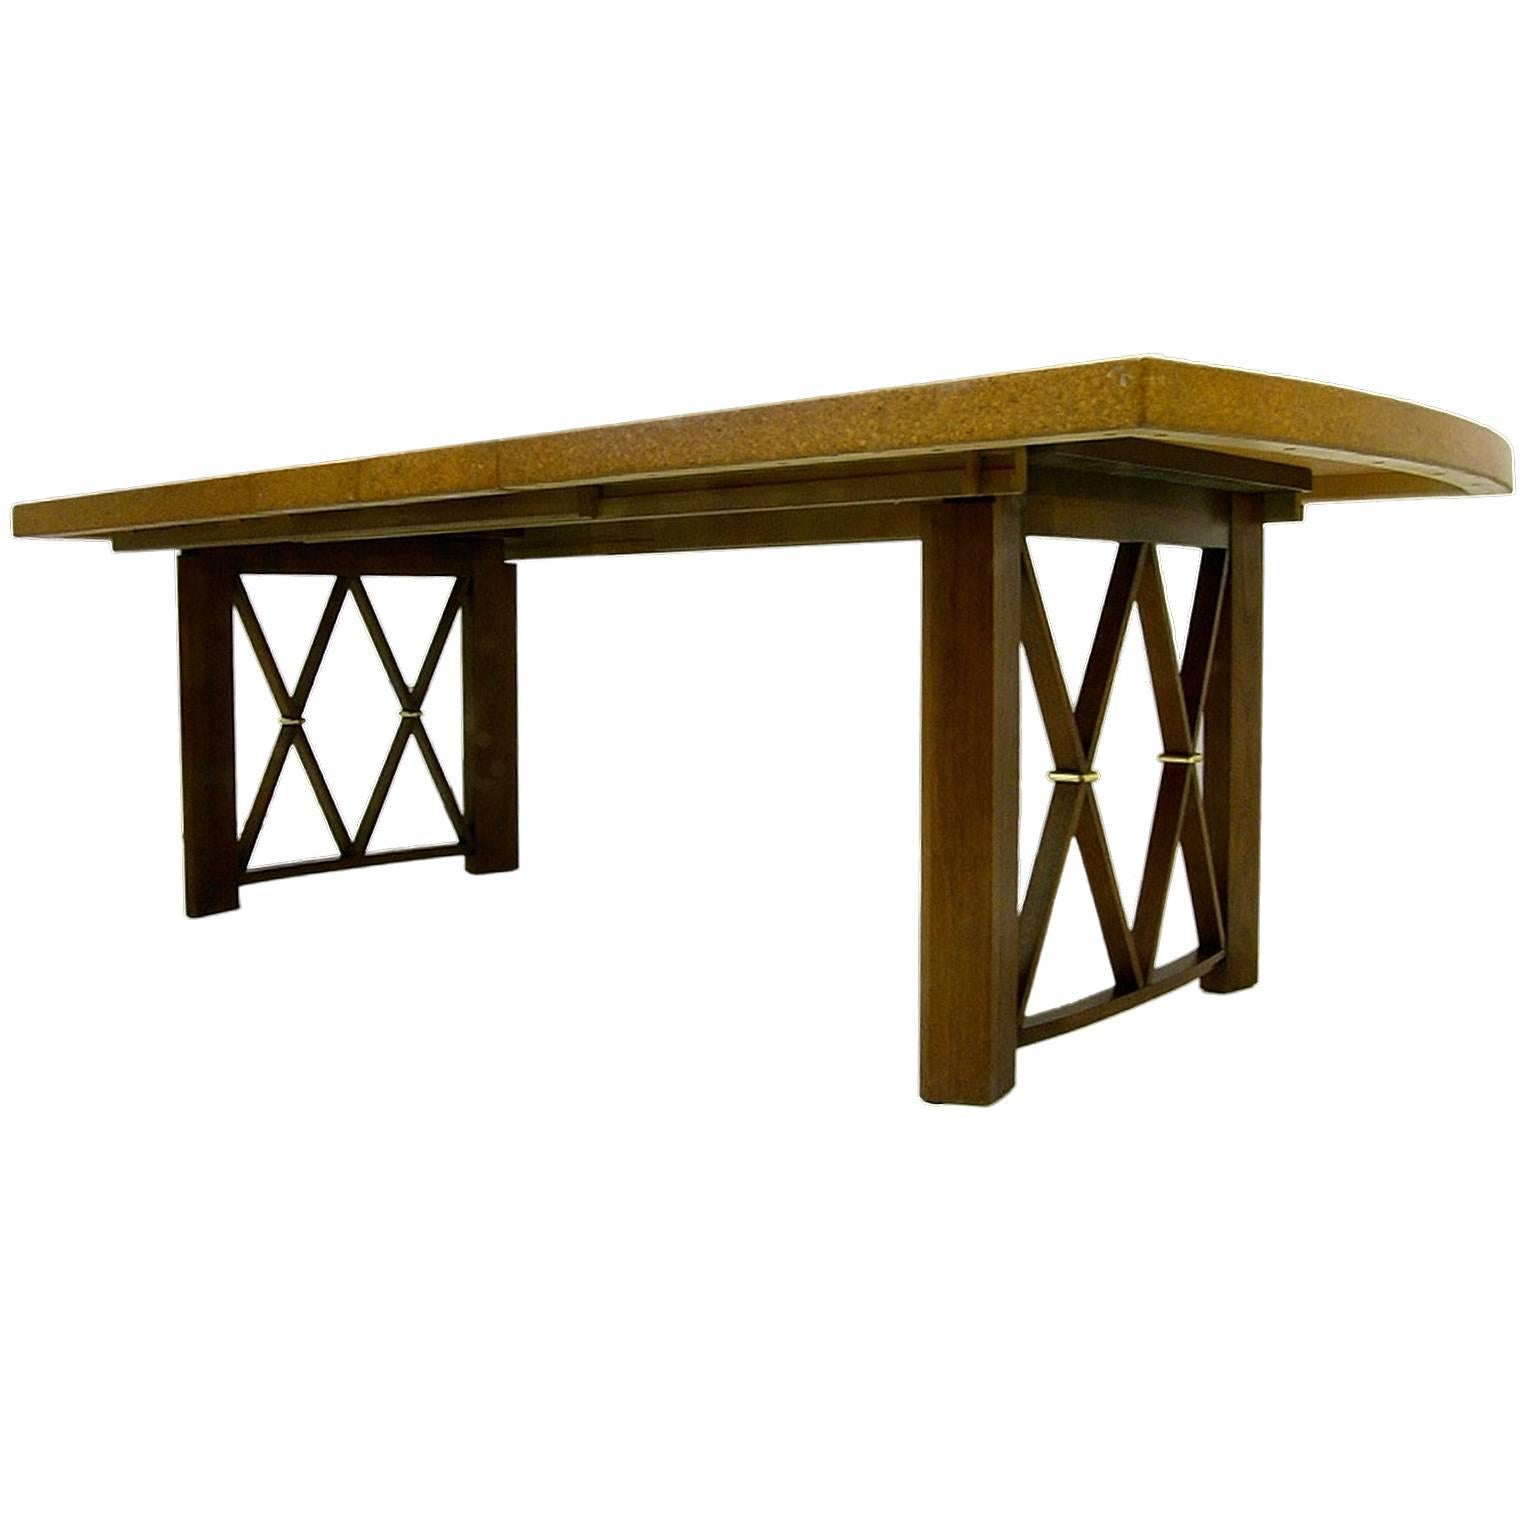 A stunning dining table with cork top and mahogany legs and X detail with brass accent. Designed by Paul Frankl for Johnson Furniture. Measurement includes two 12 inch leaves.